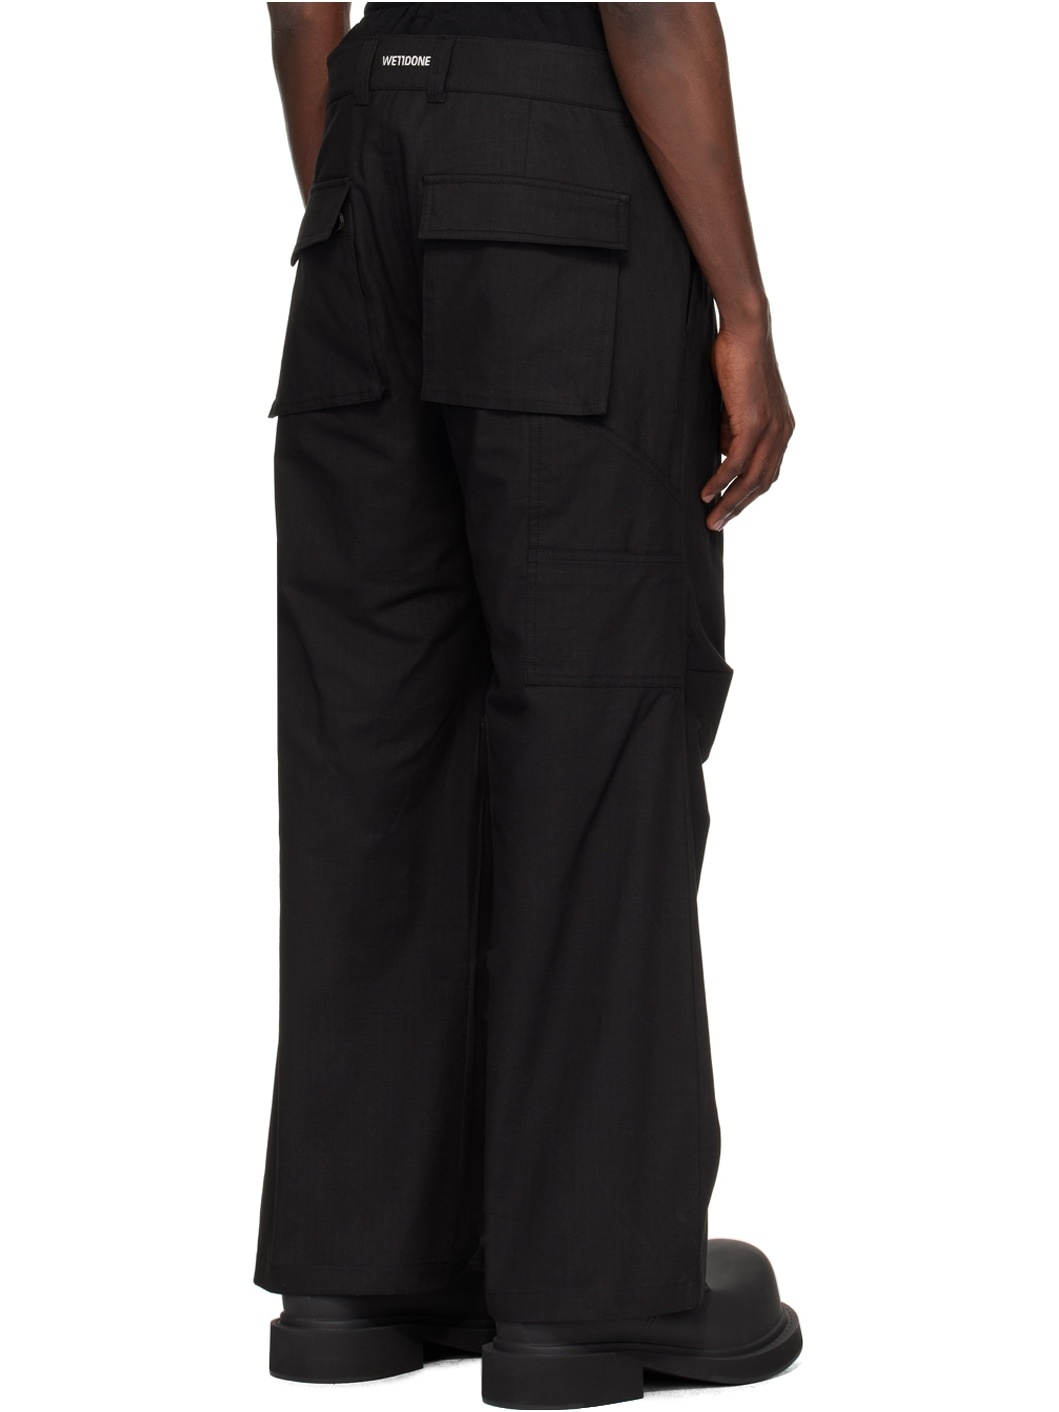 Black Layered Trousers - 3